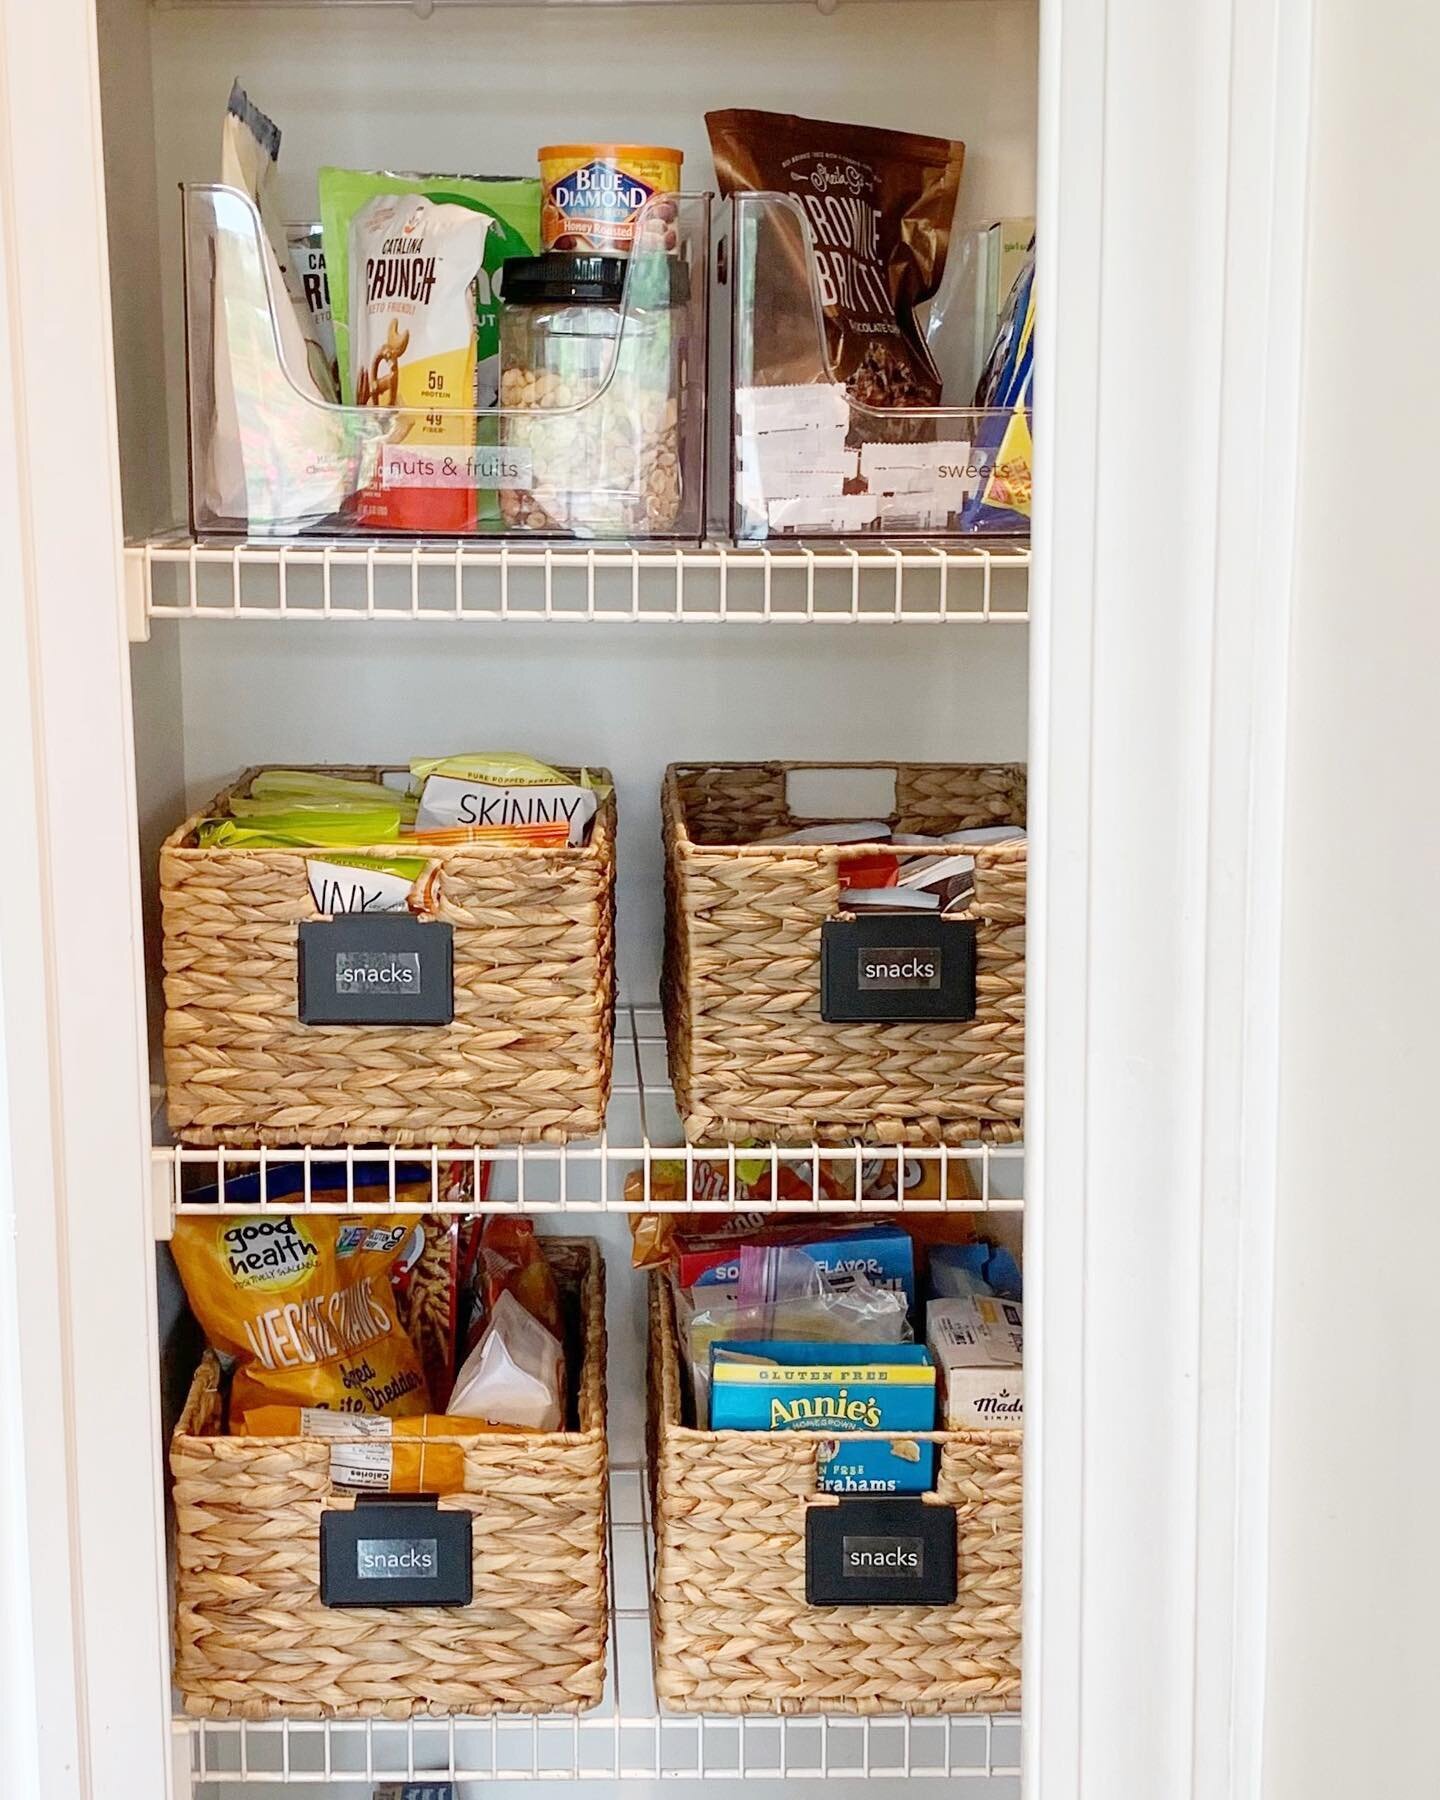 We ❤️ a good basket to fancy up a pantry! Not only do they look good, but they help you know where to find everything and help you see what you&rsquo;re running low on with a quick glance! Win win!👏😍
#pantryorganization #thecontainerstore #brightro